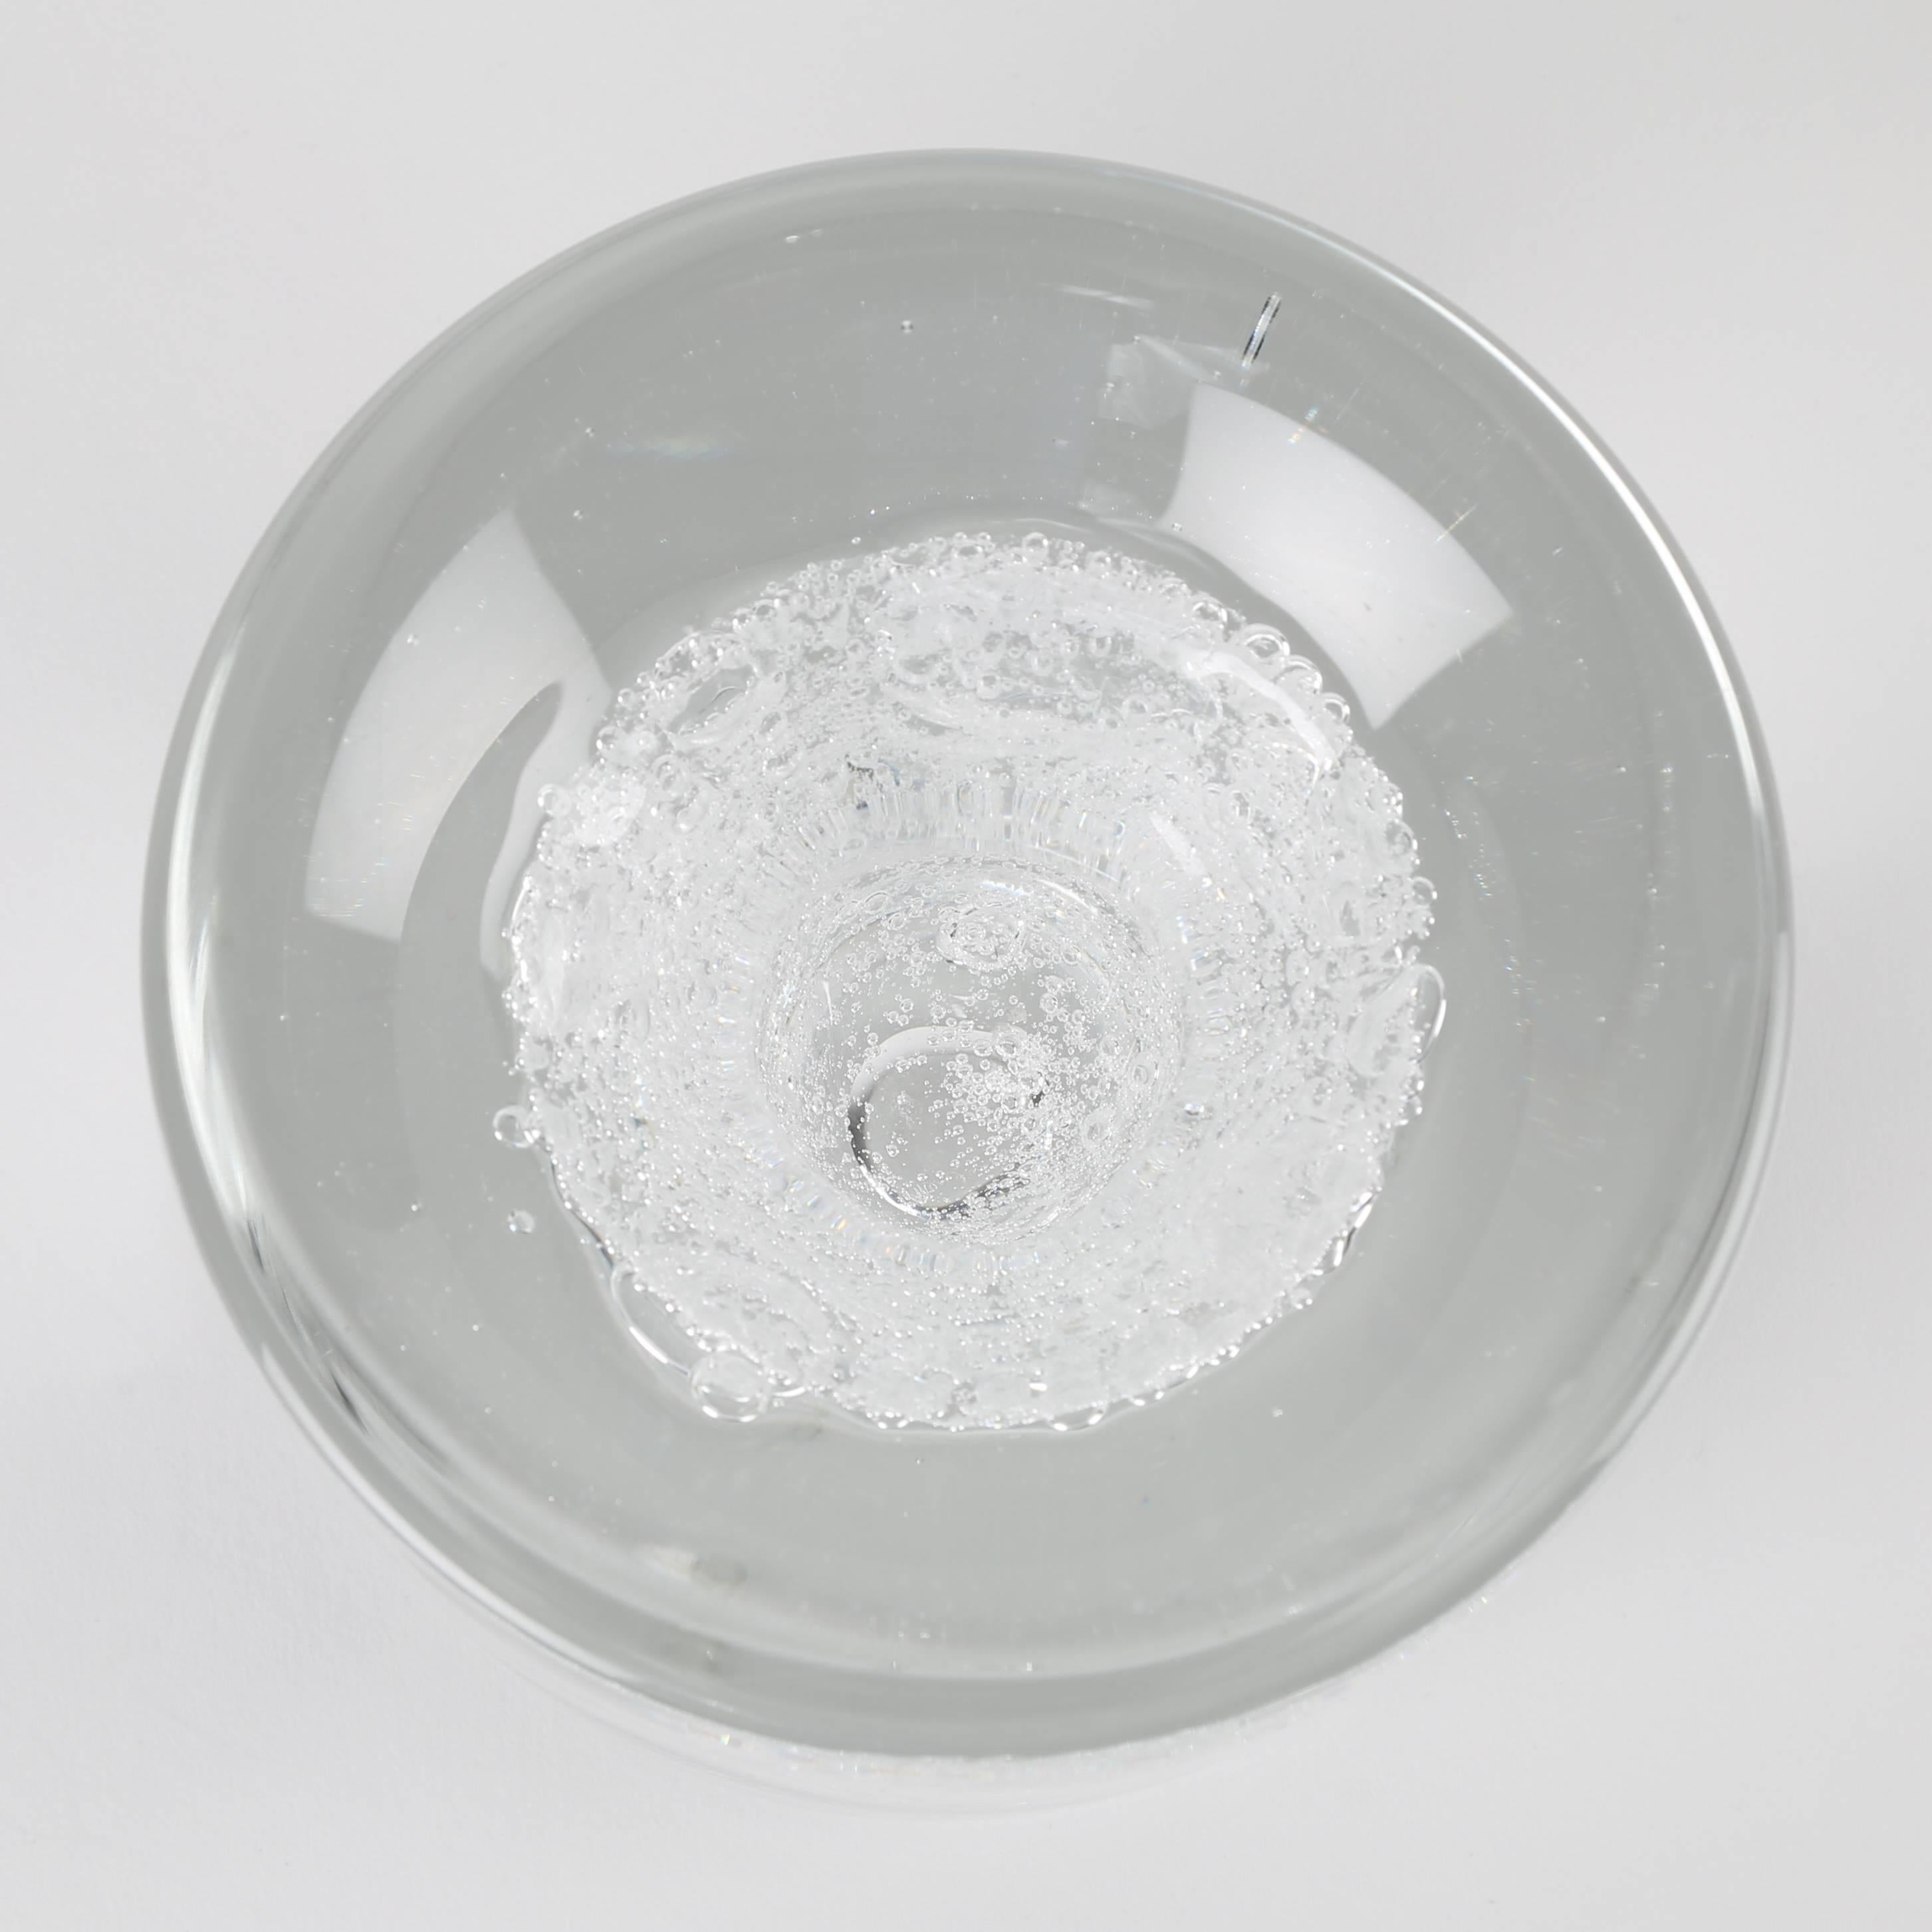 Clear Crystal Bubble Vase by Floris Meydam for Leerdam Unica, Circa 1960s In Good Condition For Sale In Brooklyn, NY